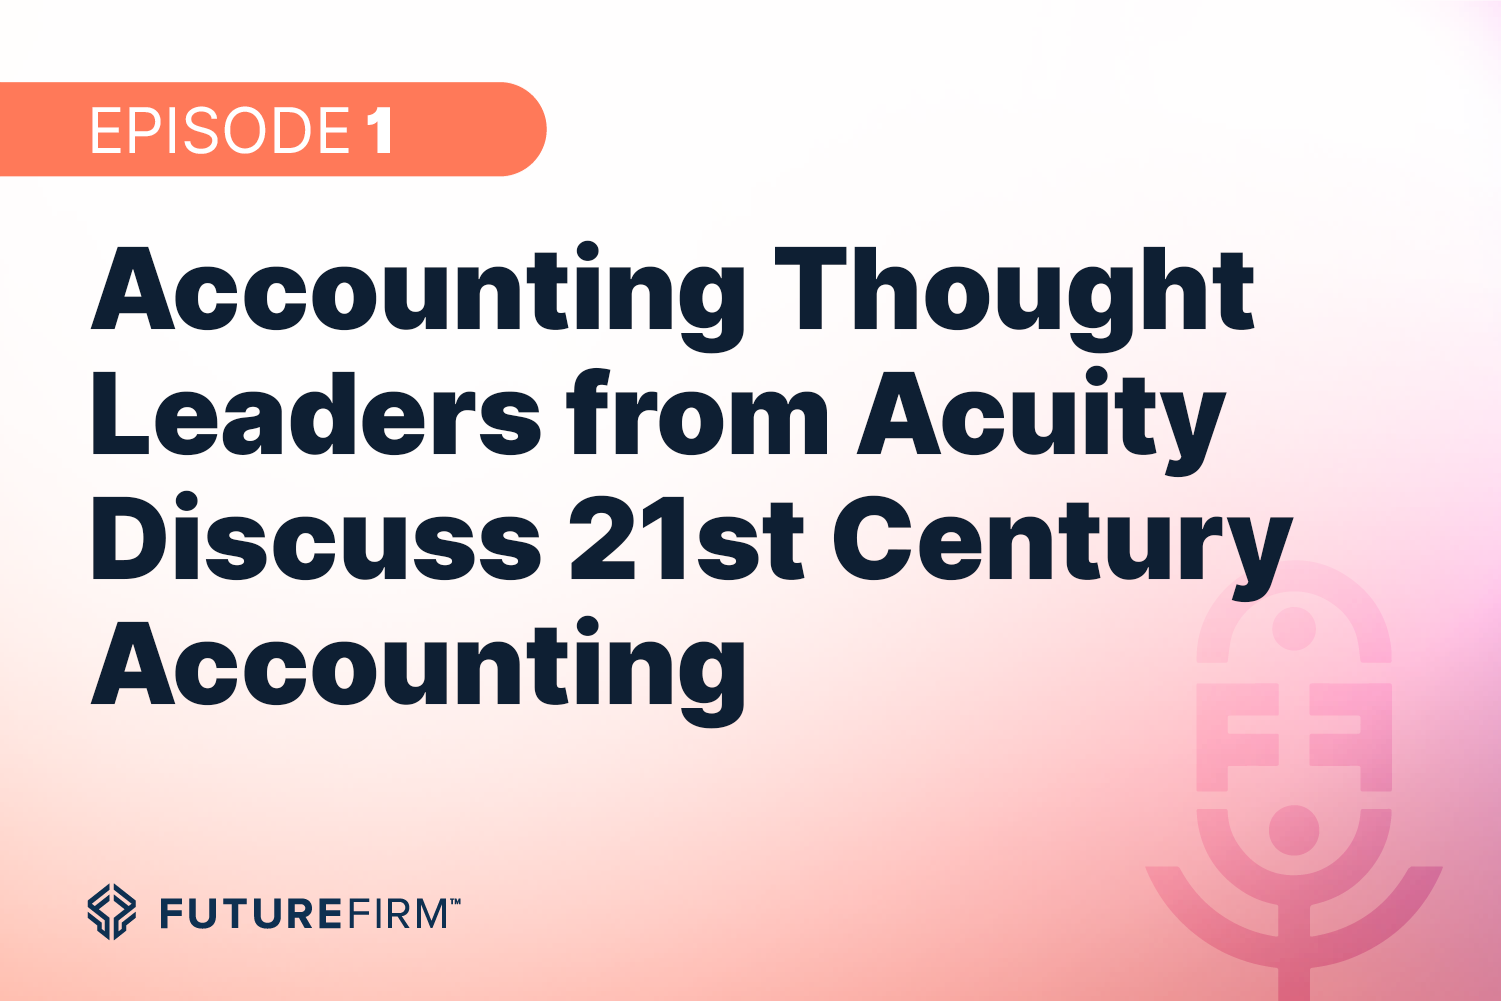 Accounting Thought Leaders from Acuity Discuss 21st Century Accounting